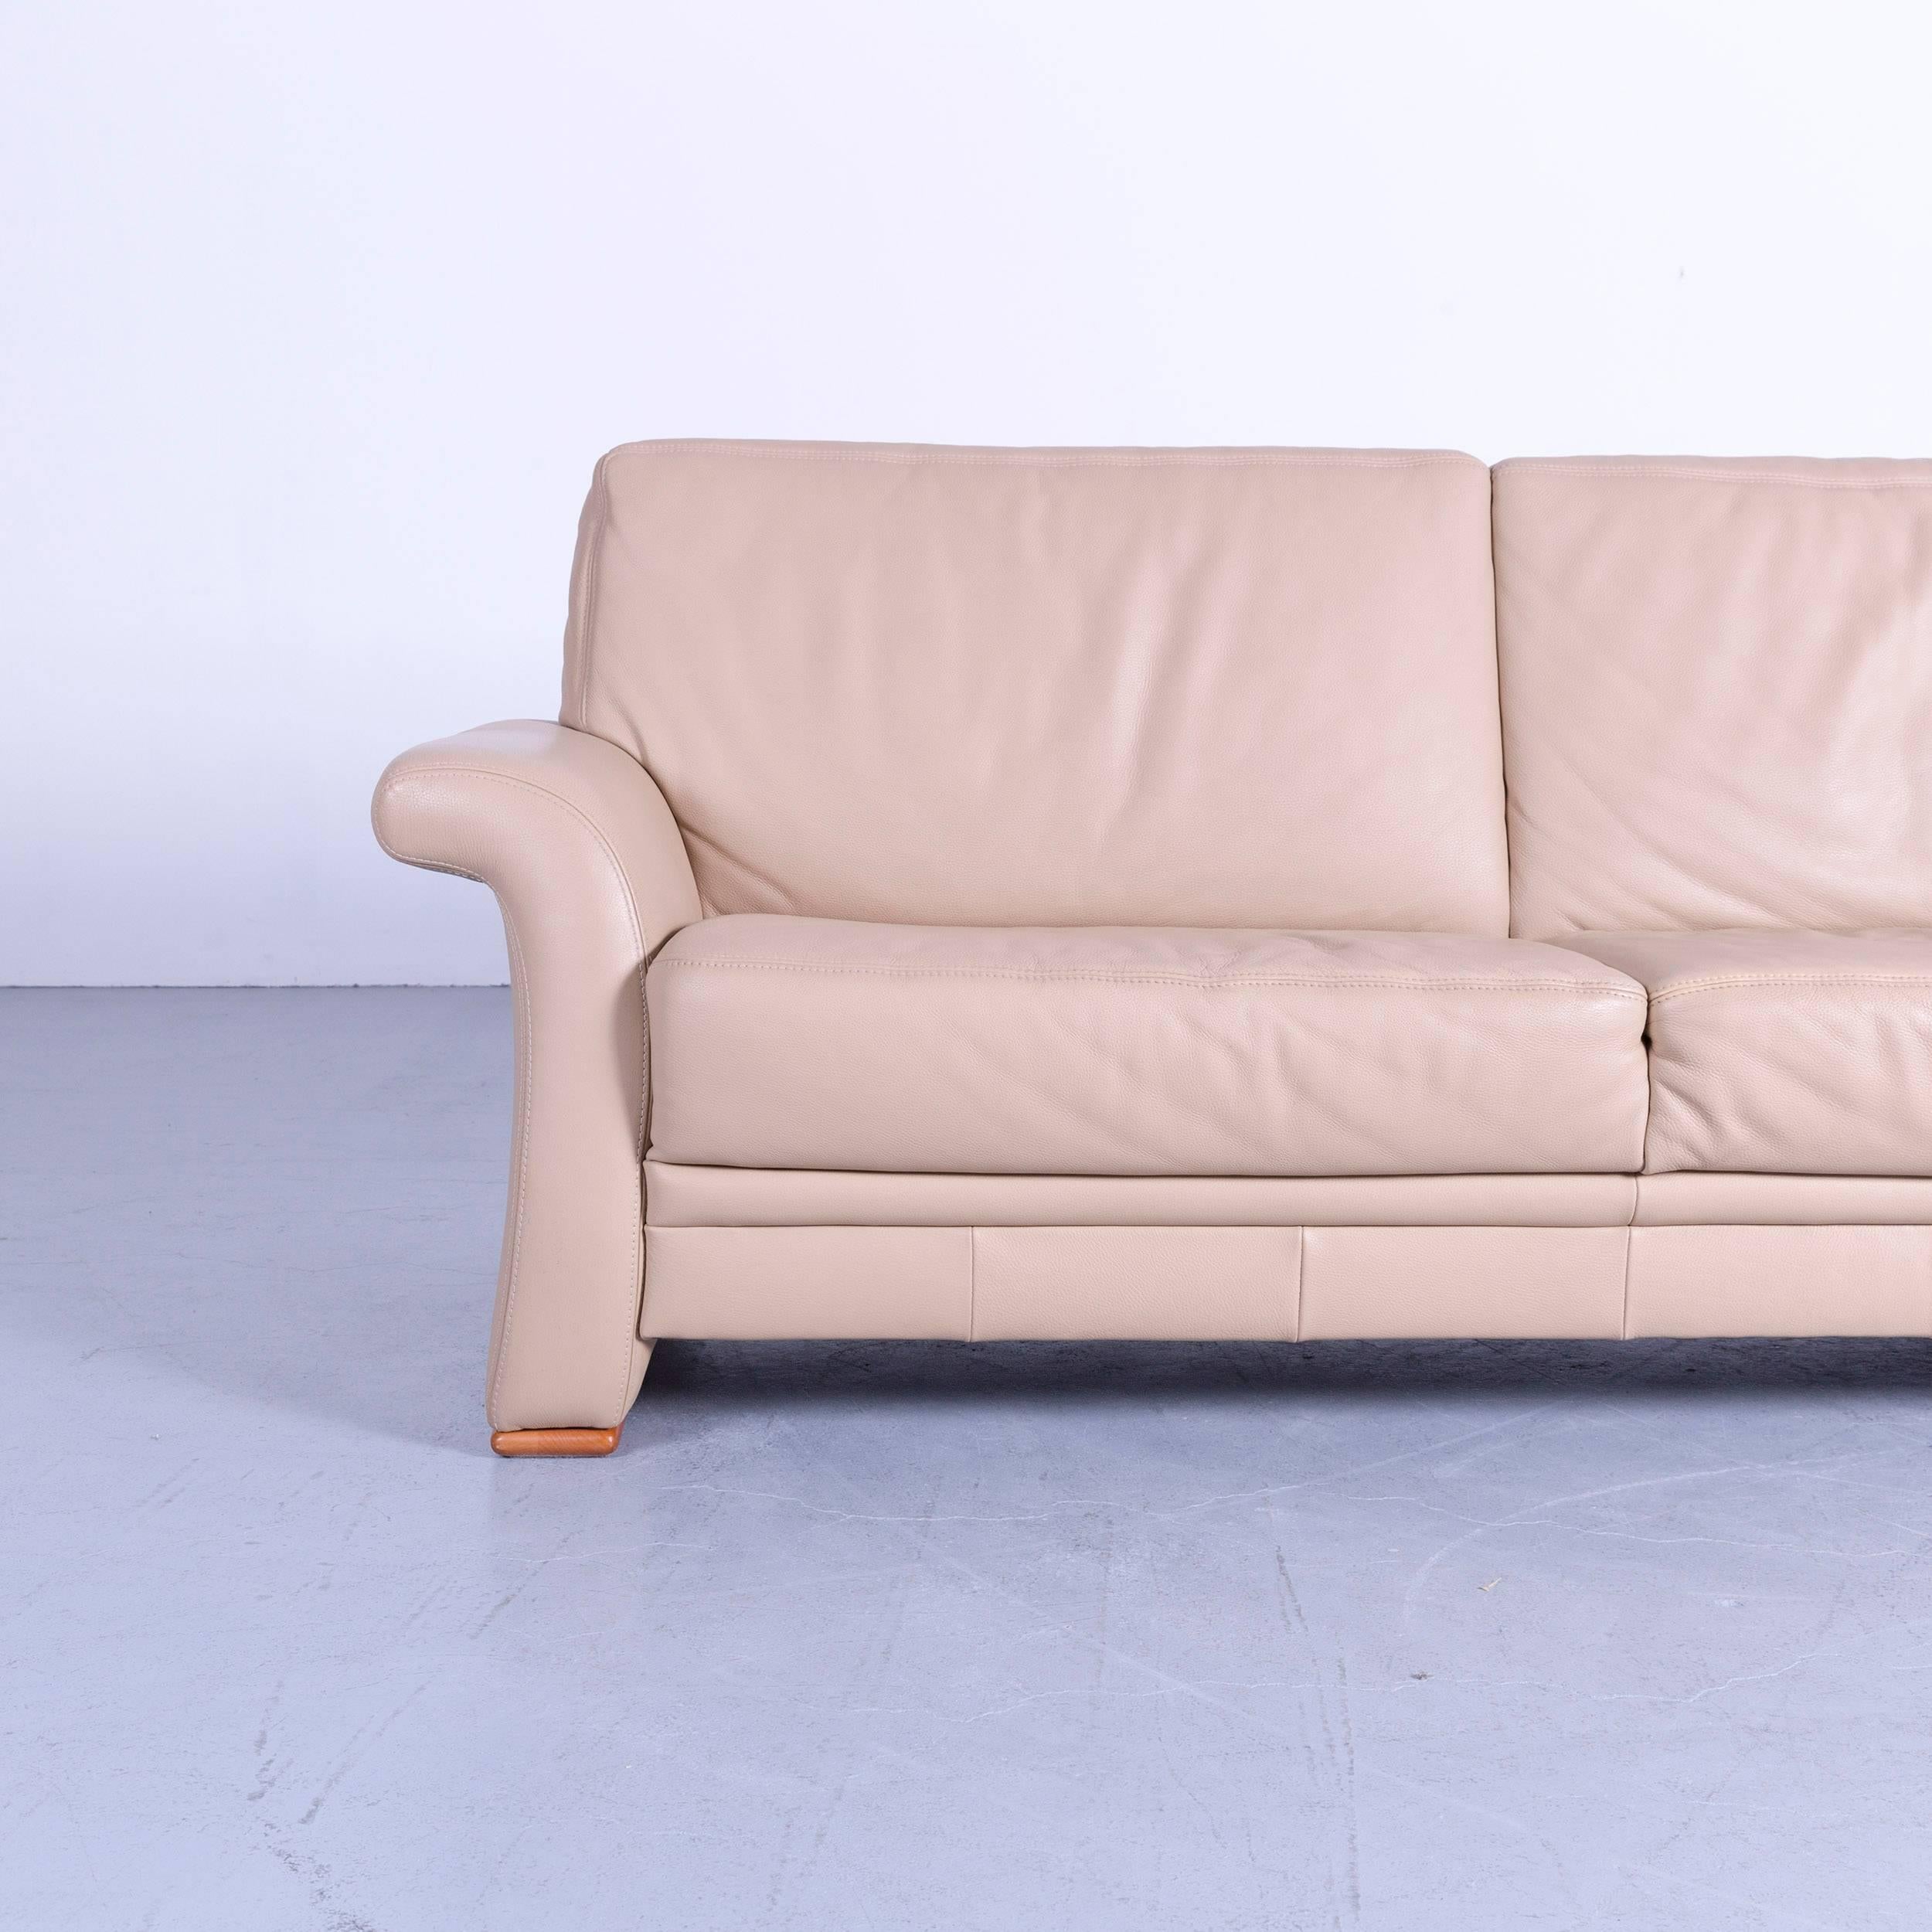 A super comfy Euri Collection sofa two-seat in beige color.